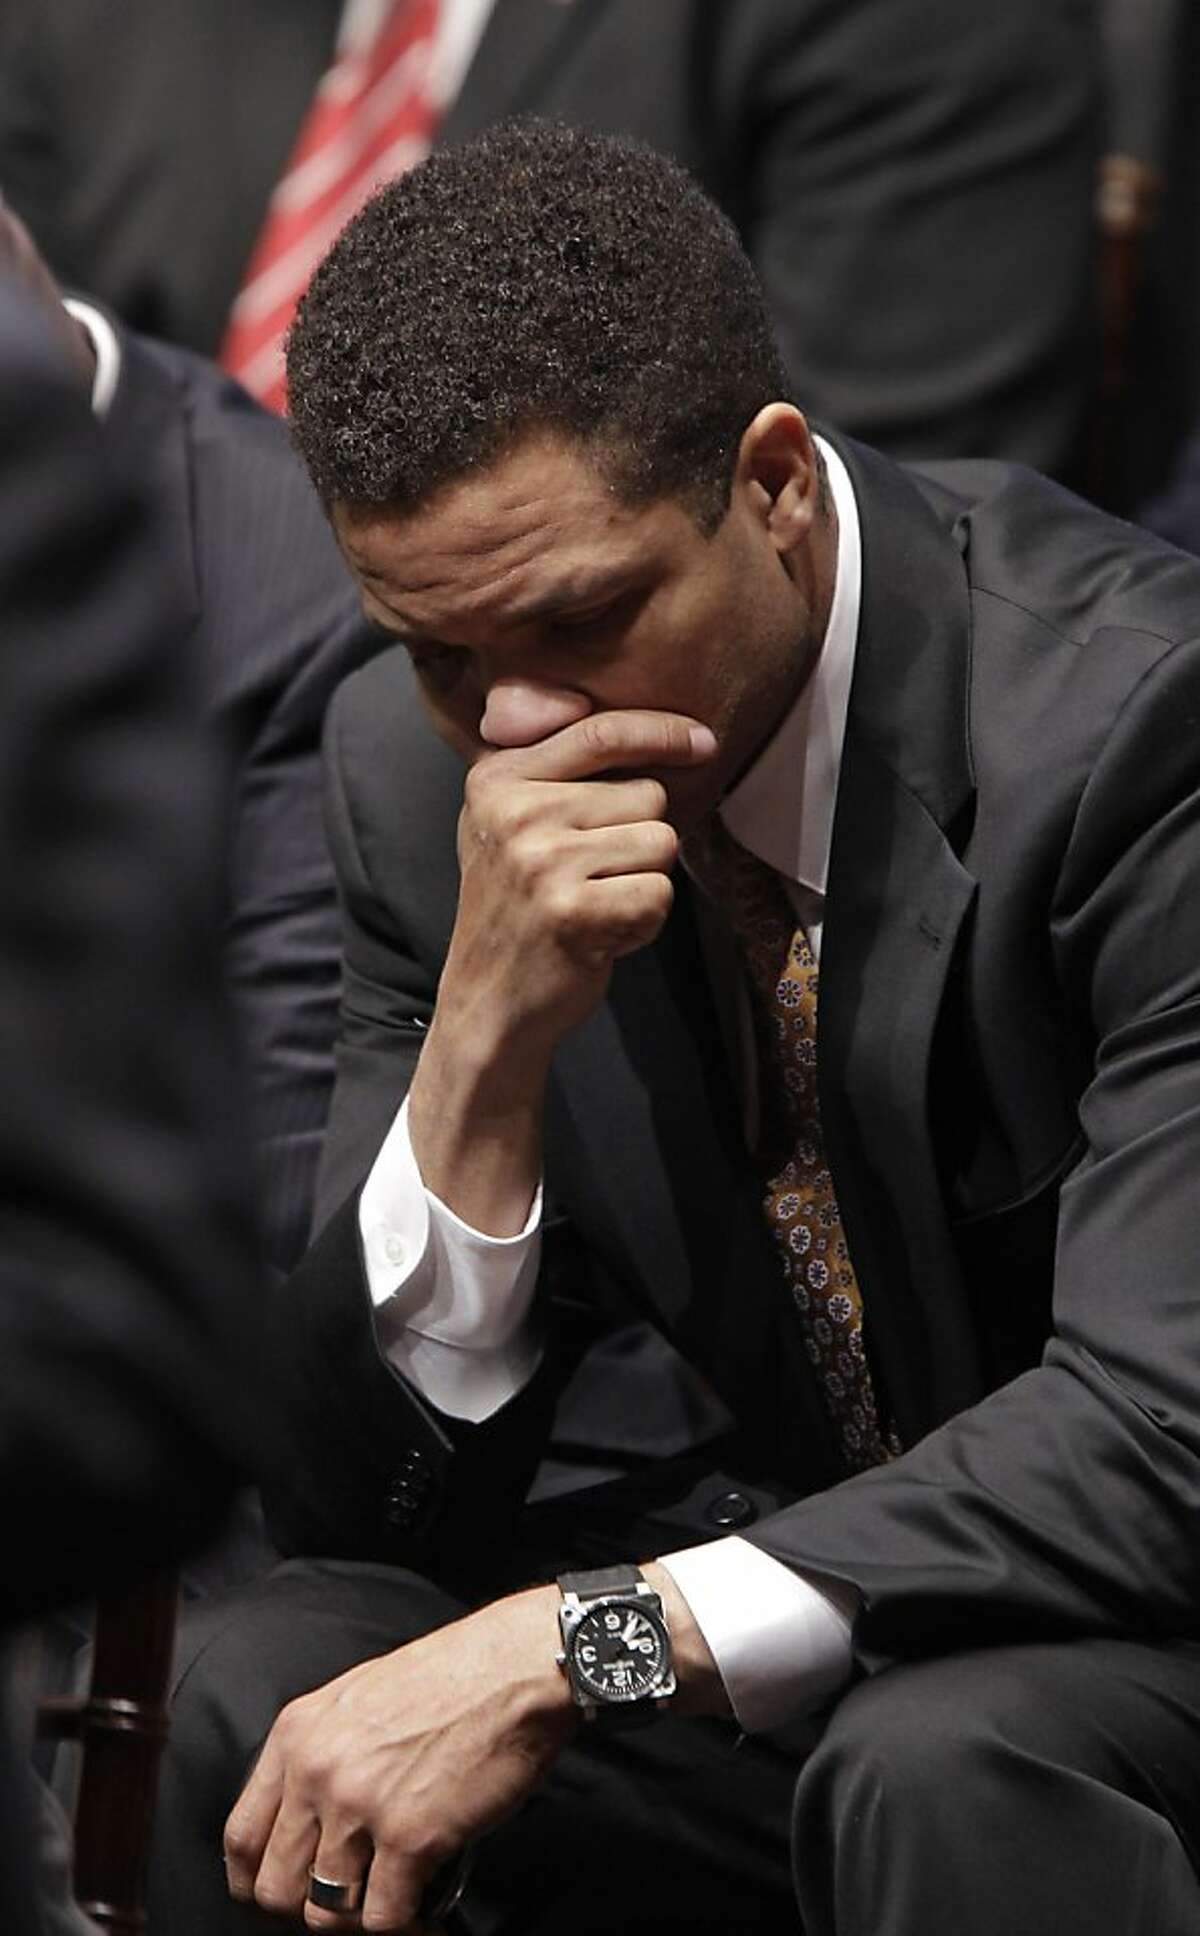 In this Jan. 5, 2011 file photo, Rep. Jesse Jackson, Jr., D-Ill., is pictured before a ceremonial swearing in of the Congressional Black Caucus on Capitol Hill in Washington. When Jackson disappeared on a mysterious medical leave in June 2012, it took weeks for anyone there to notice. Jackson has never lived up to the high expectations on the national stage. But none of that seems to matter in his district, where he's brought home close to $1 billion in earmarks and other funding and won every election since 1995 in a landslide, despite nagging ethical questions over links to imprisoned former Gov. Rod Blagojevich. The dual roles could help explain why the Democrat has given so few details of his medical leave. (AP Photo/Charles Dharapak, File)